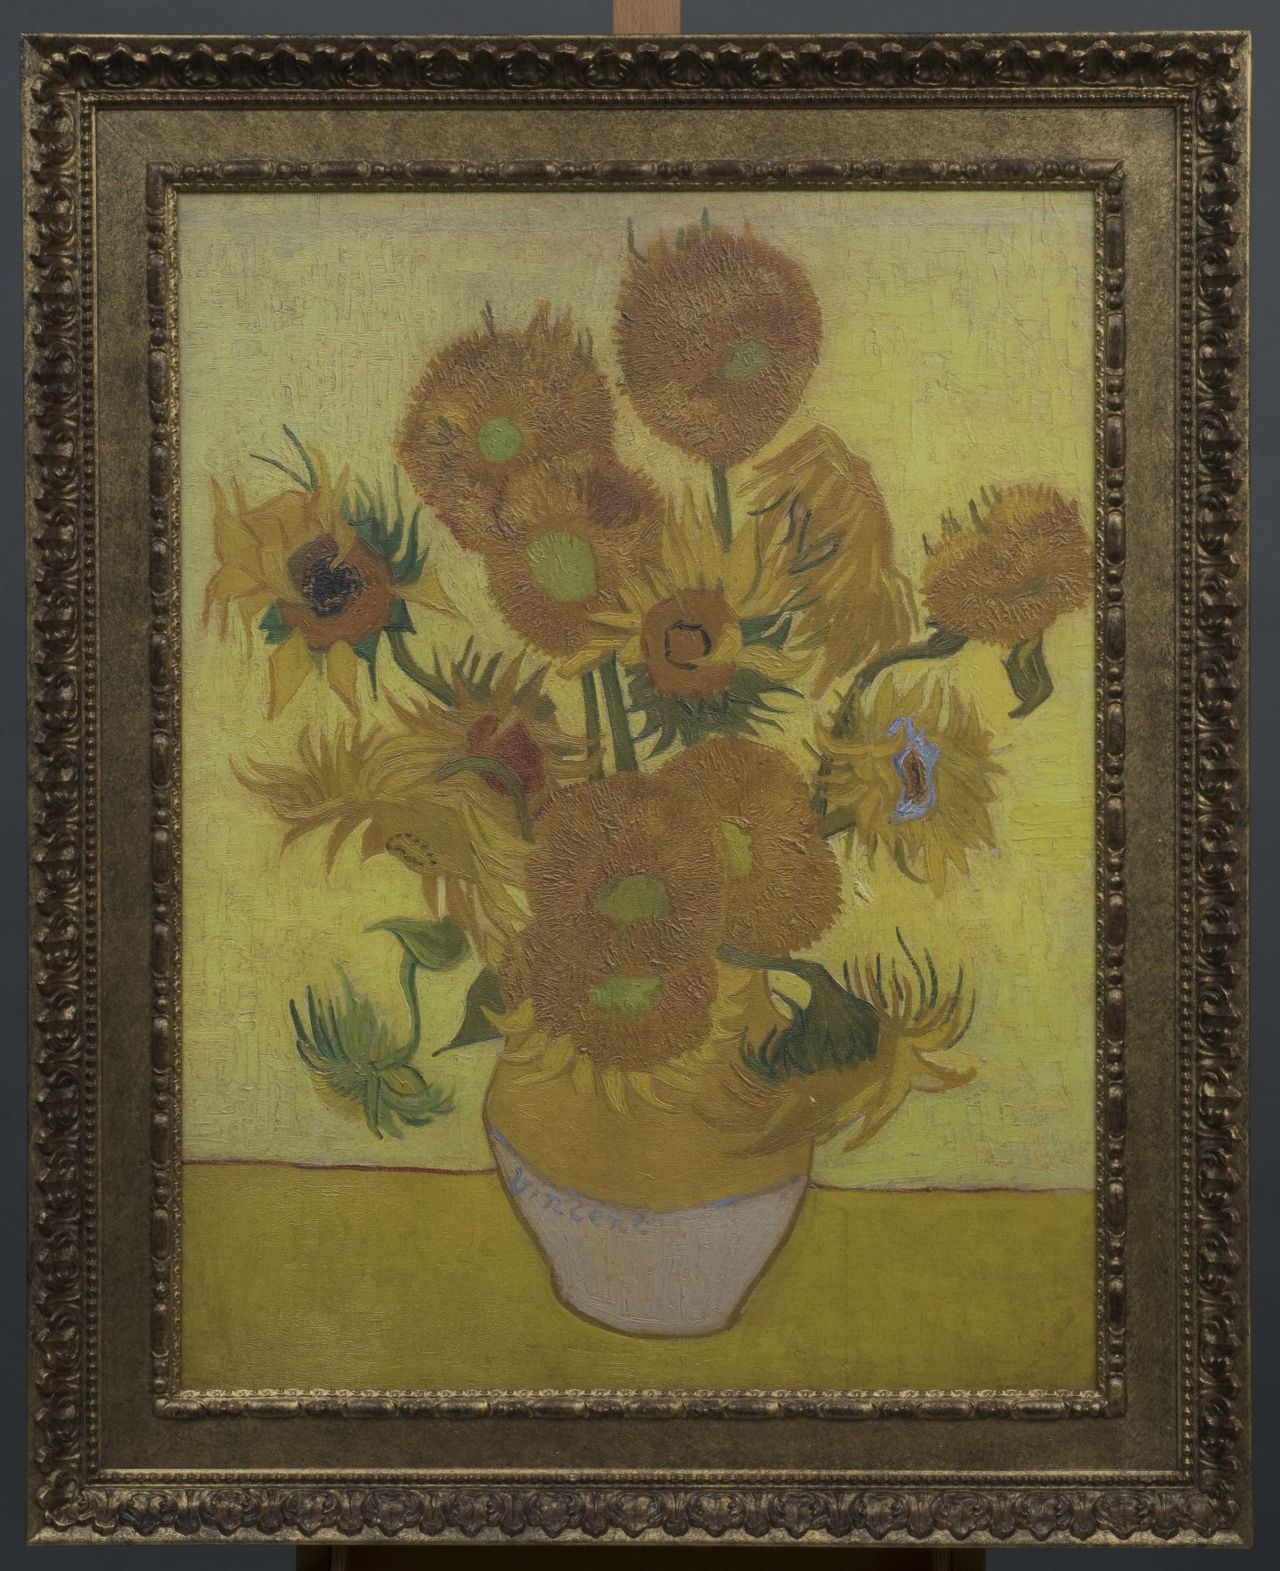 Working with Fujifilm, the Van Gogh Museum has created 3-D printed reproductions—called "Relievos"—of five masterpieces. This "Sunflowers" Relievo captures the direction and relief of Van Gogh's brushstrokes, and its 32 shades of yellow. The museum sells the reproductions for €25,000 each, or about $34,000.